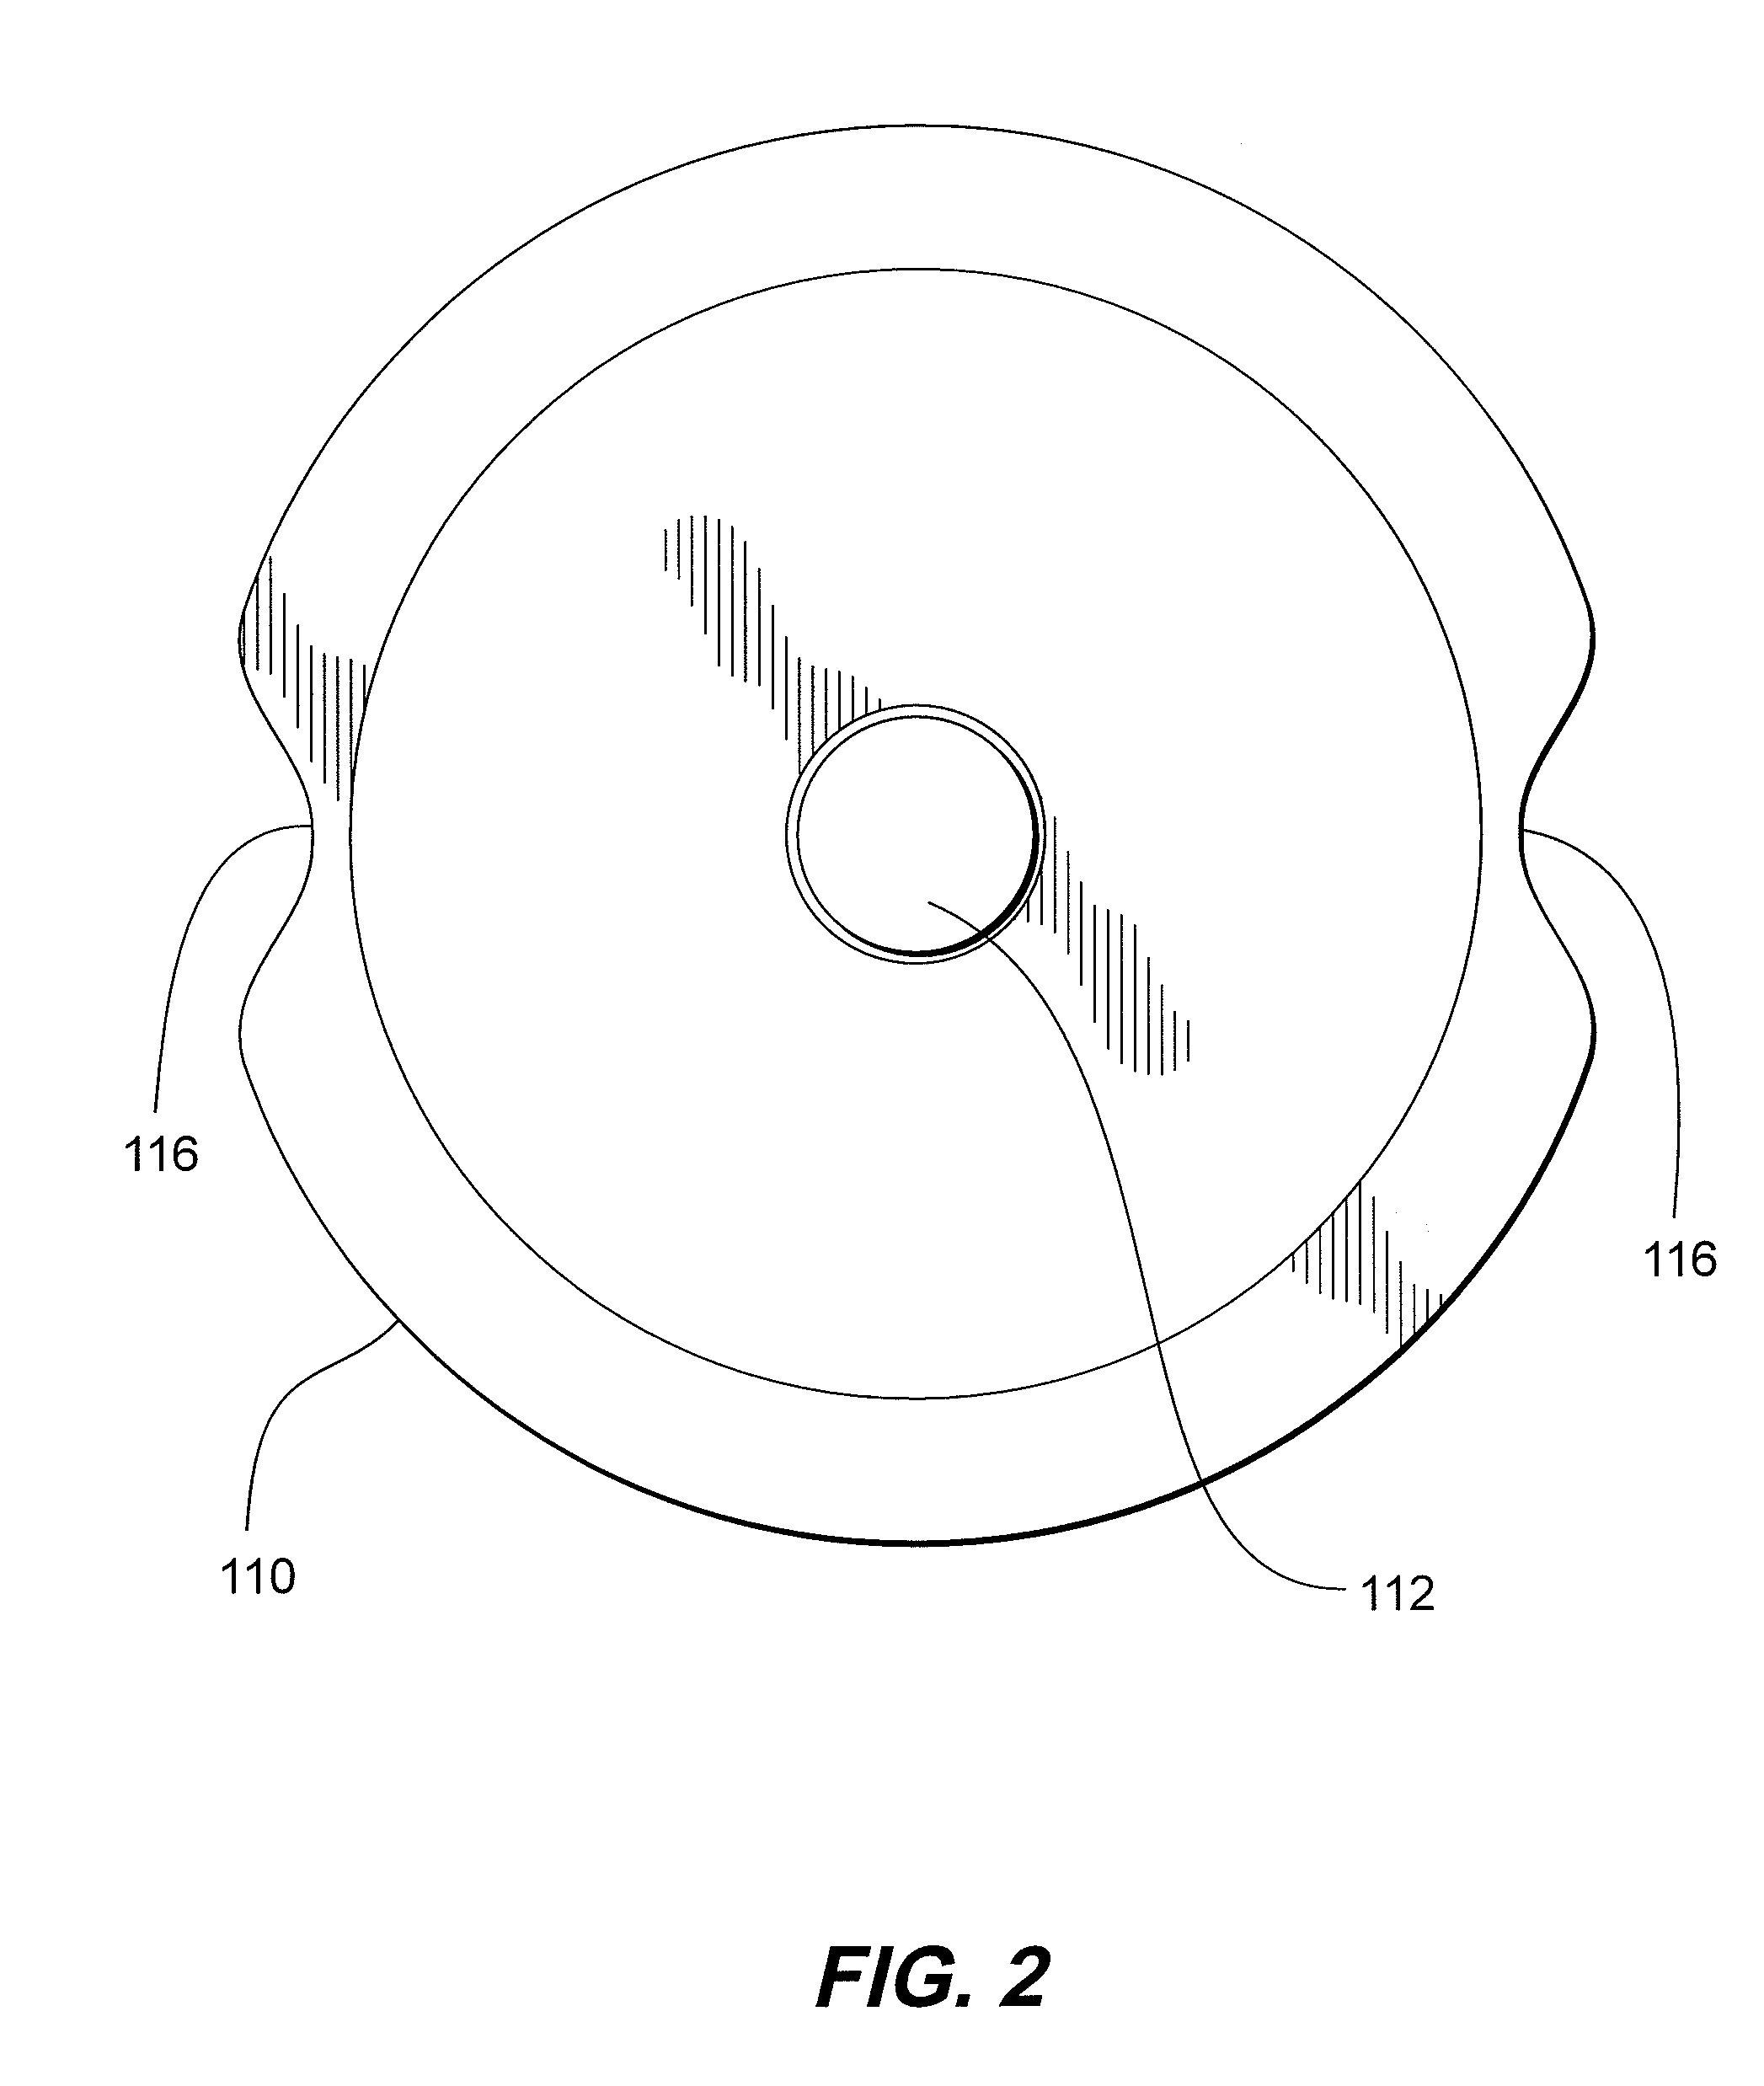 Rotary pump having a valve rotor and one or more vane rotors and methods for pumping fluids